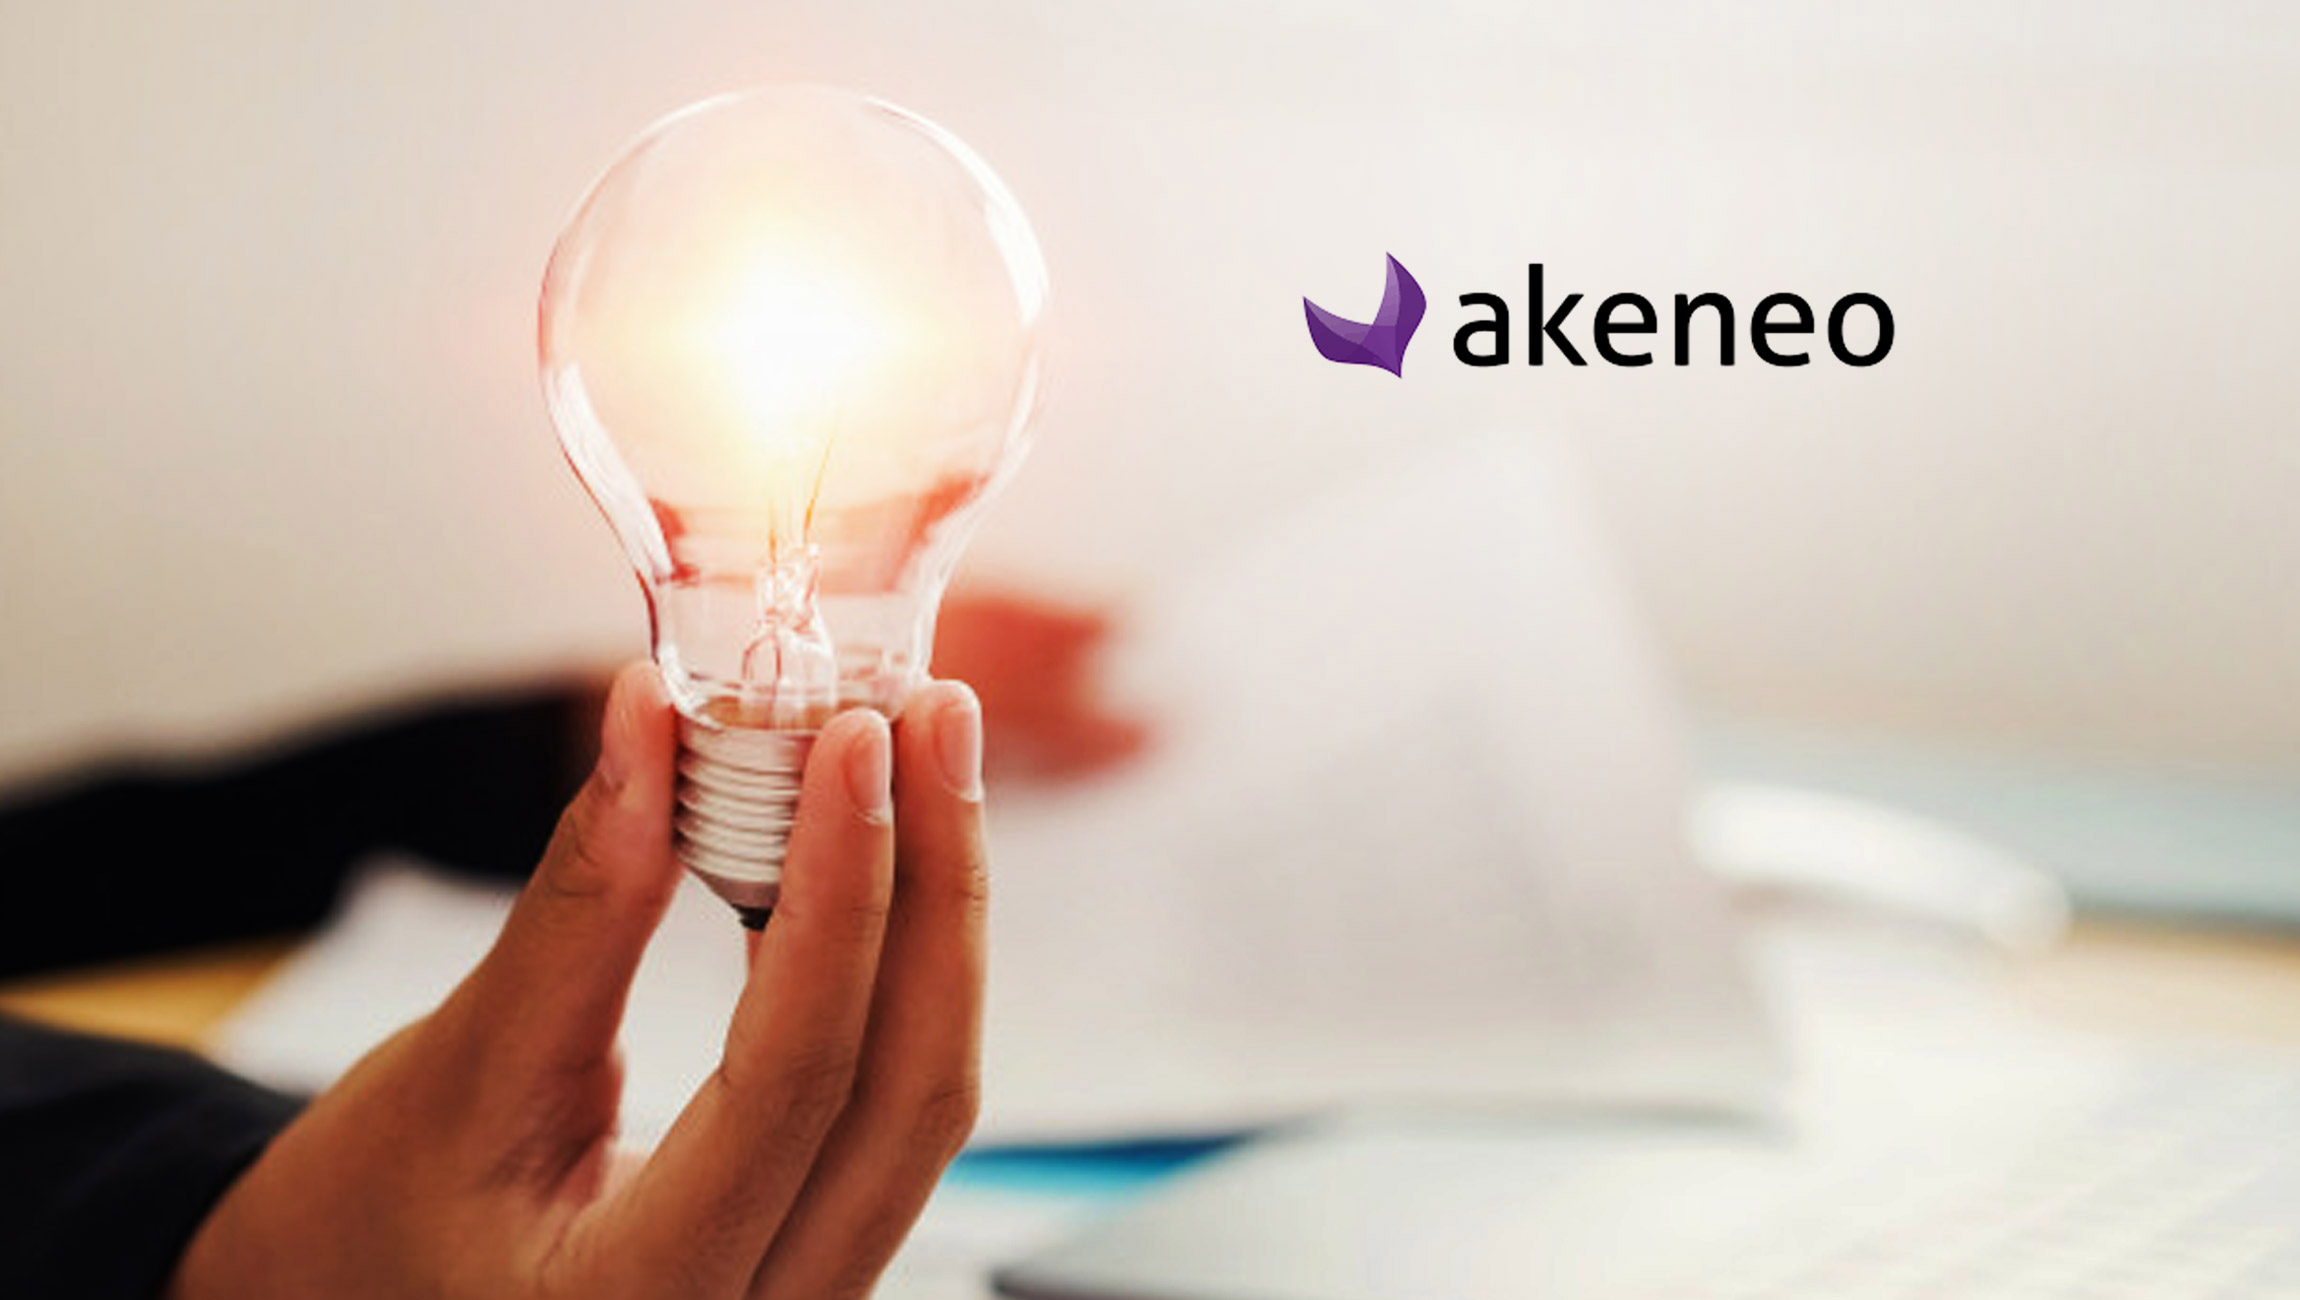 ChannelEngine and Akeneo offer an integrated Marketplace & Product Information Management Solution for Brands and Retailers globally